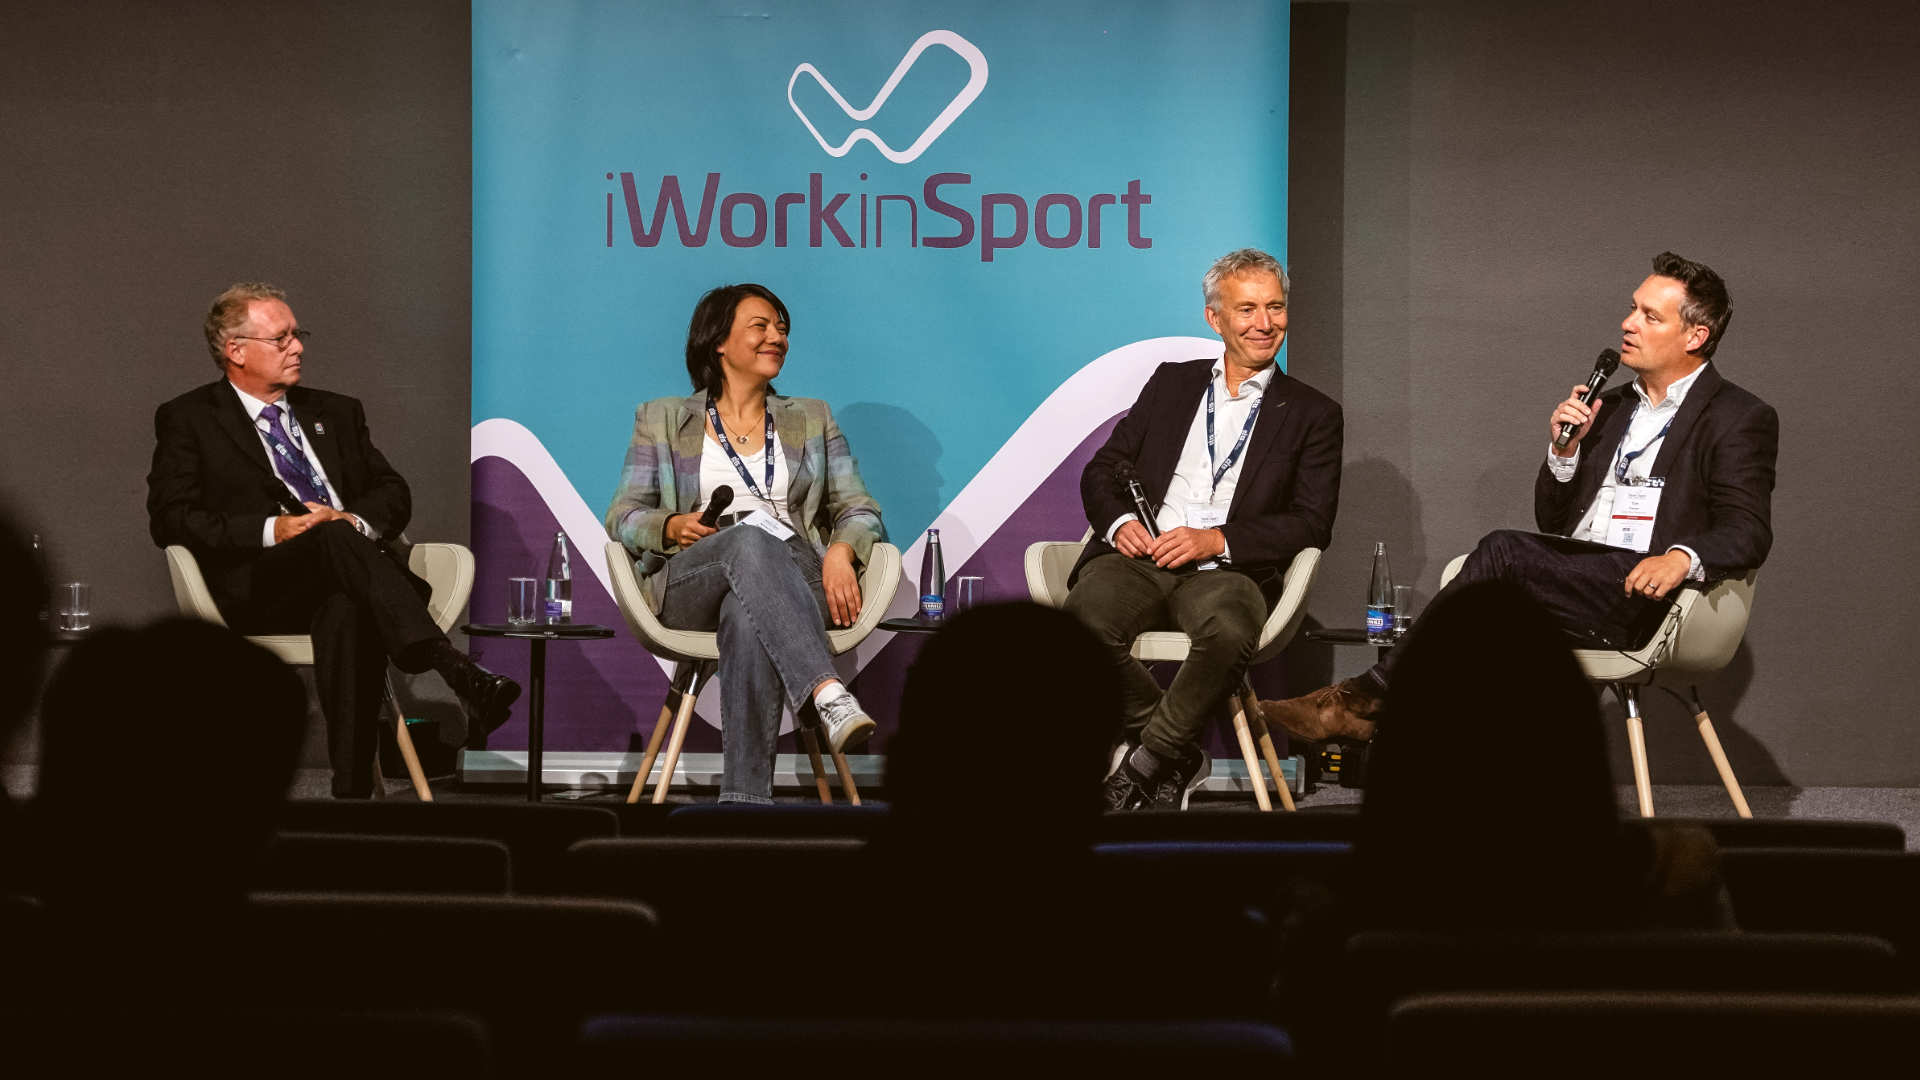 Liga Portugal to attend and present at the iWorkinSport Job Fair